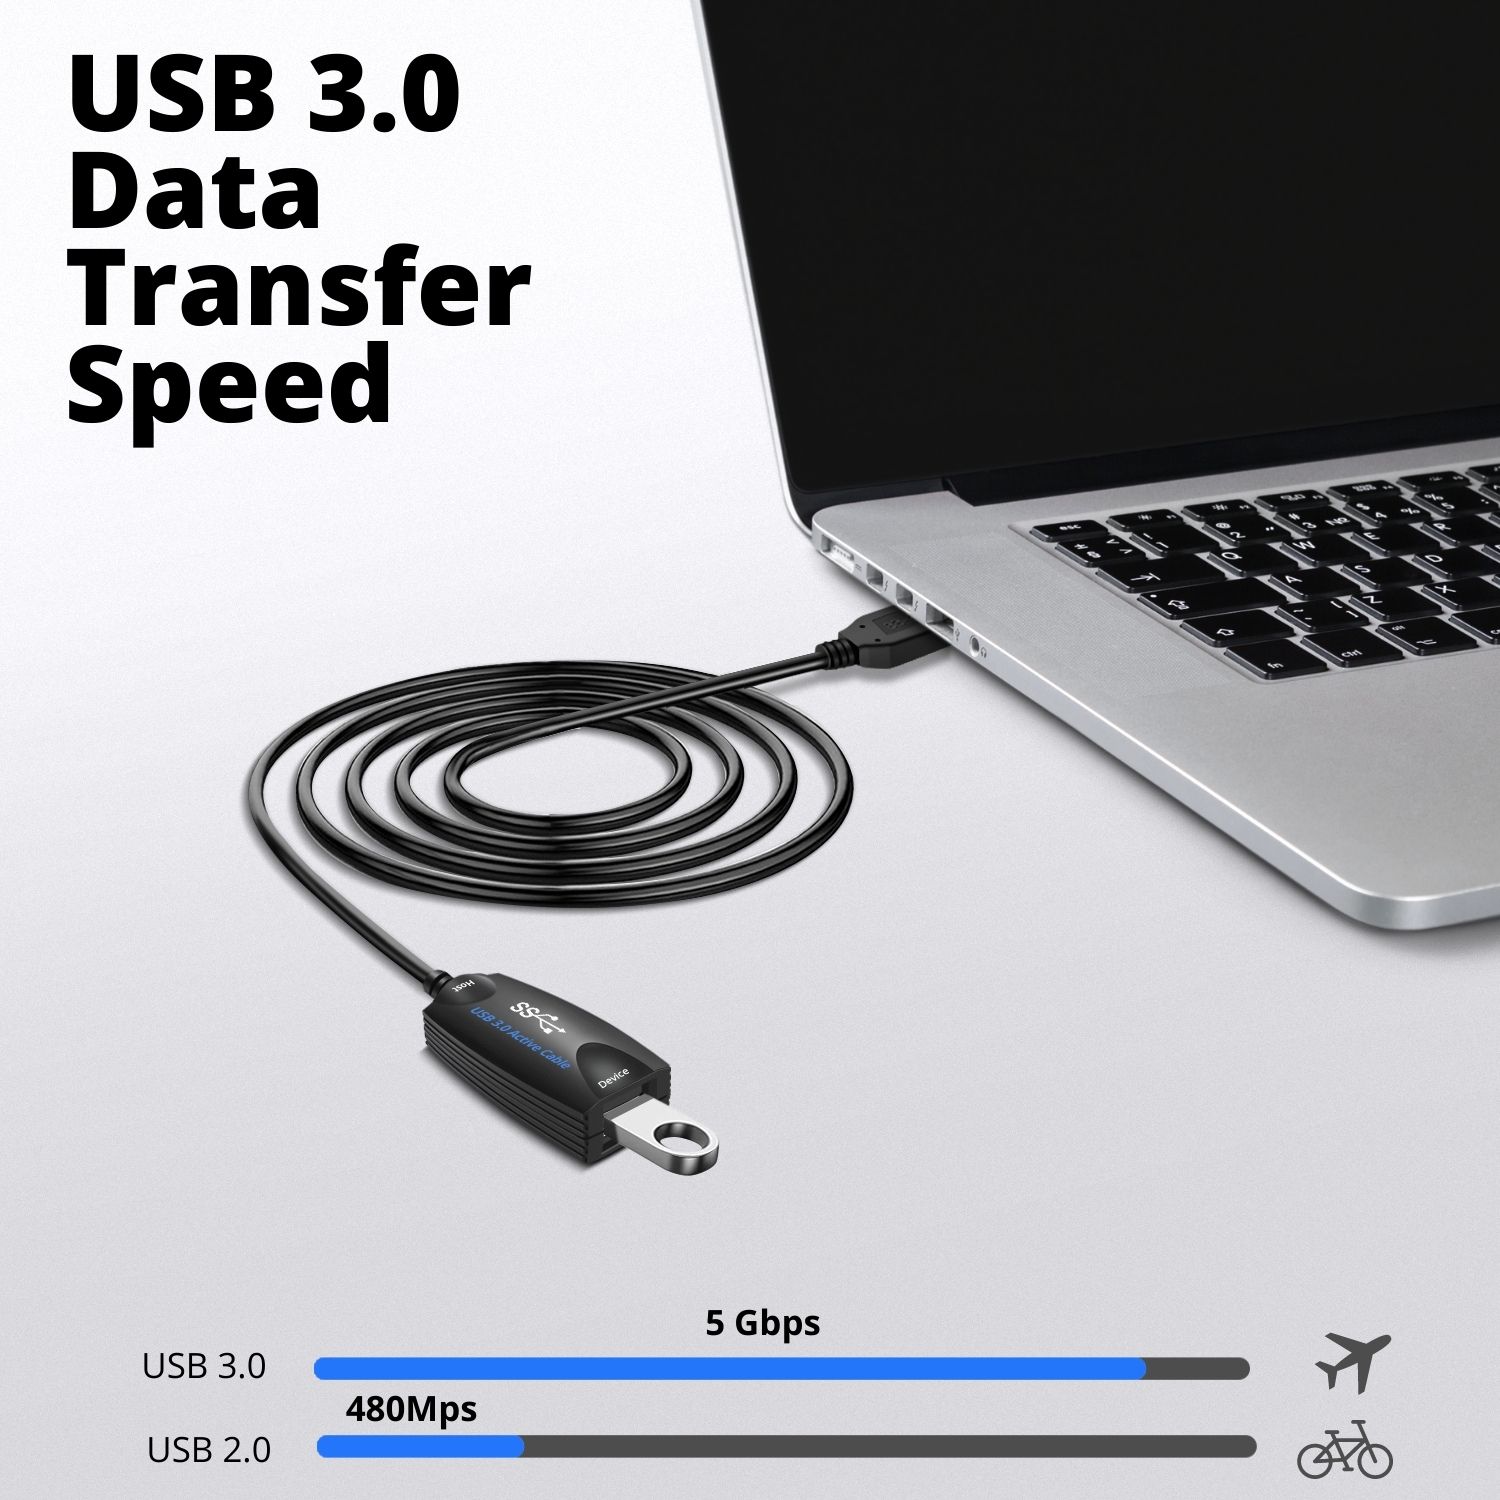 Ultra High Speed - USB 3.0 data transfer rate at up to 5 Gbps, 10x faster than USB 2.0, which allows you to transfer HD movies or raw photos and files form disks or cameras in just seconds